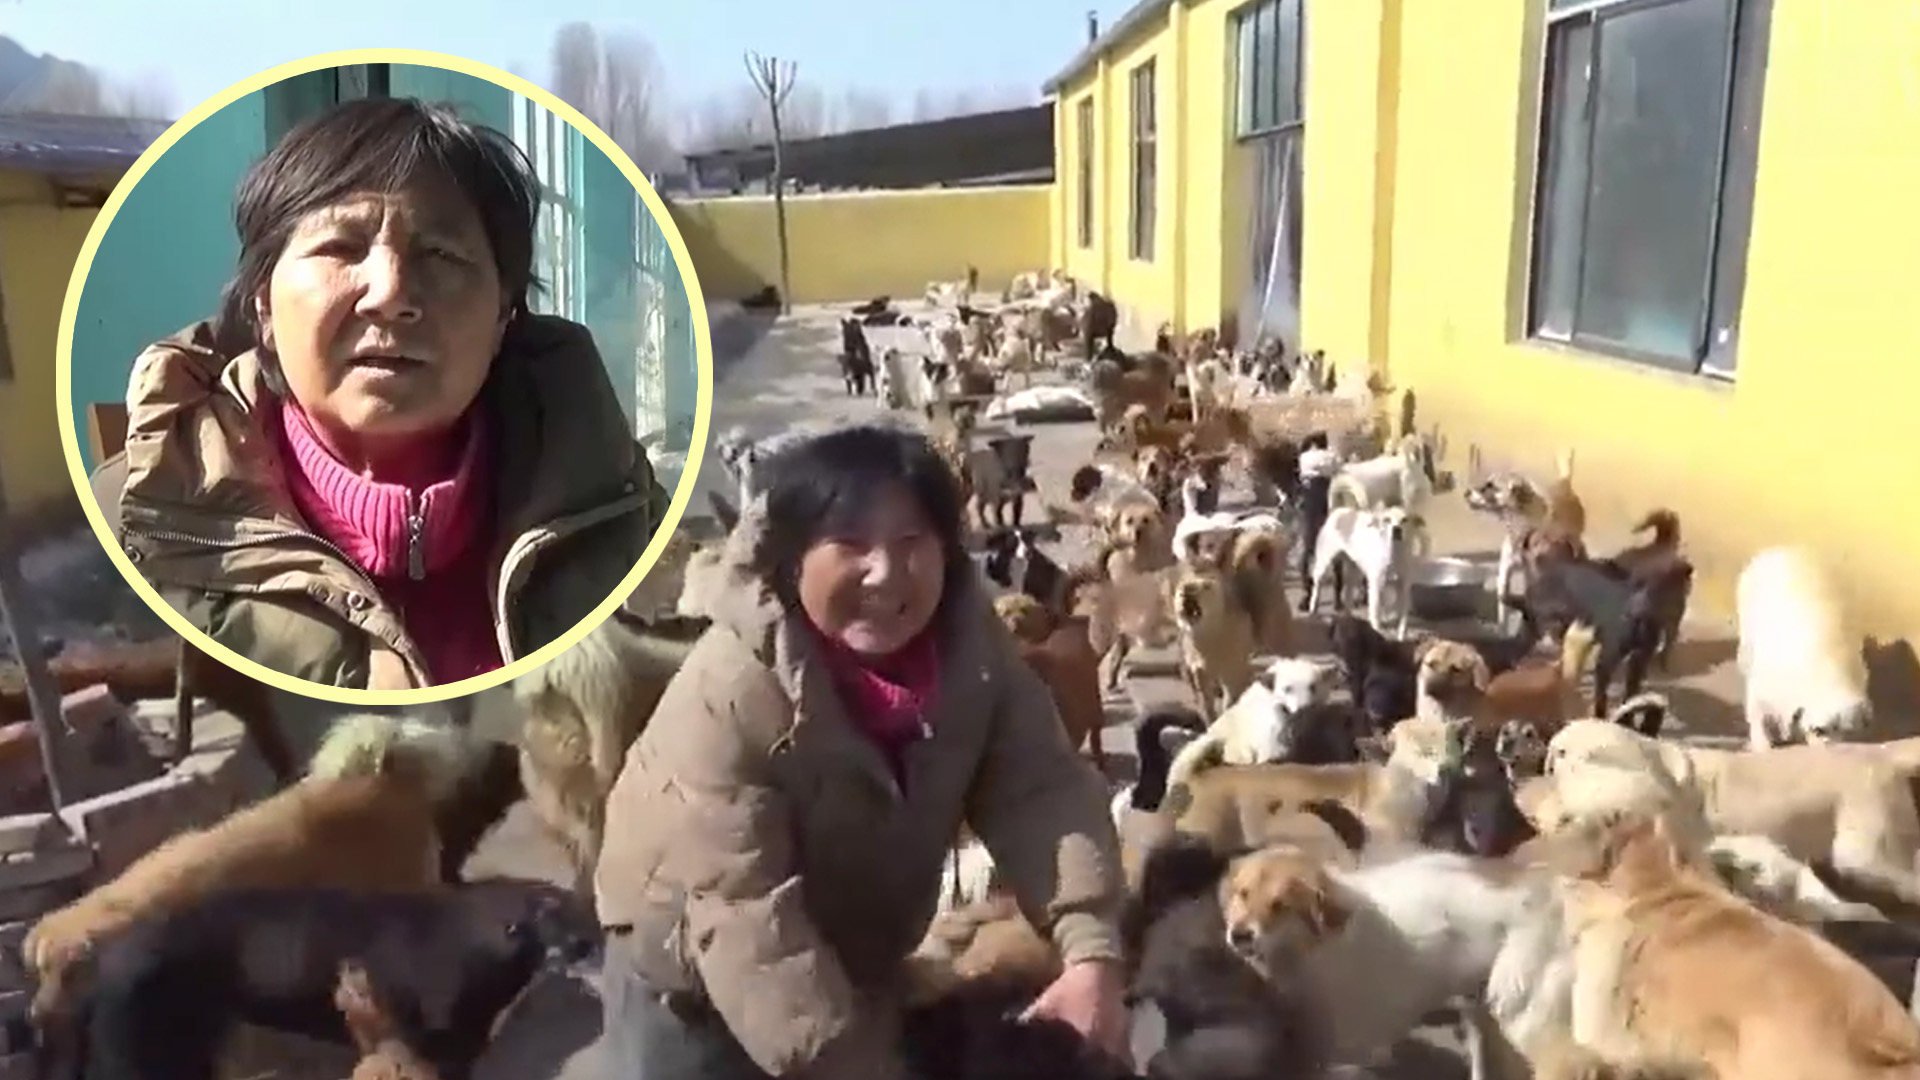 The story of a 66-year-old woman in China who has spent the past 15 years looking after thousands of stray dogs and cats, sacrificing her family life and running up debts of US$70,000 in the process, has captivated mainland social media. Photo: SCMP composite/Weibo